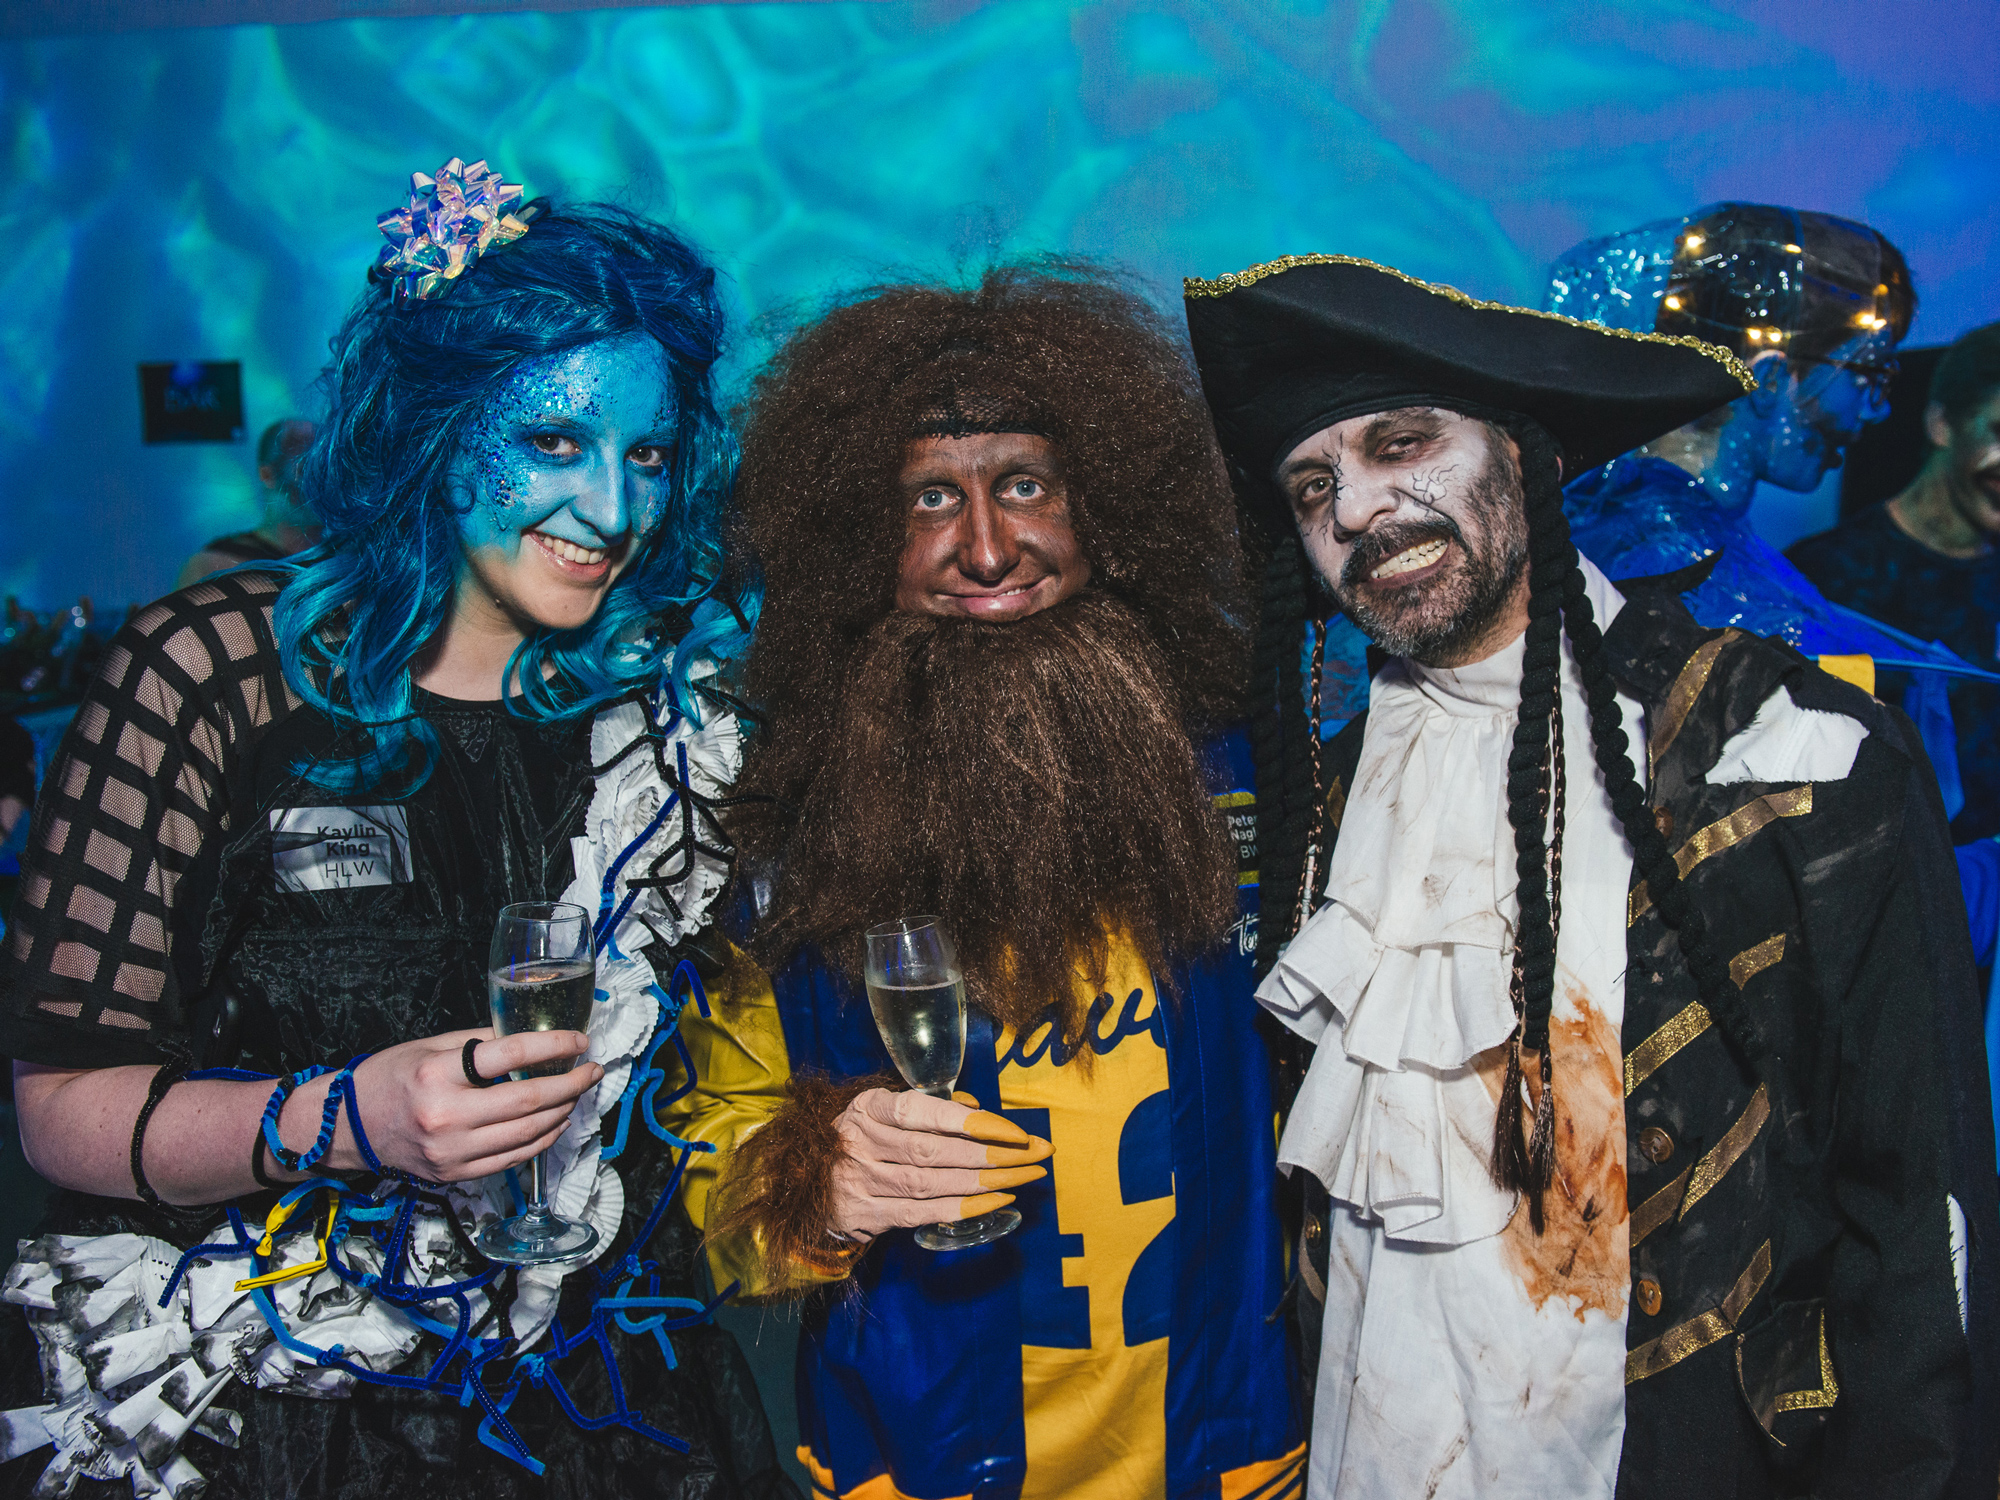 Three costumed attendees in vibrant, mythical creature outfits enjoying a themed event with blue lighting.